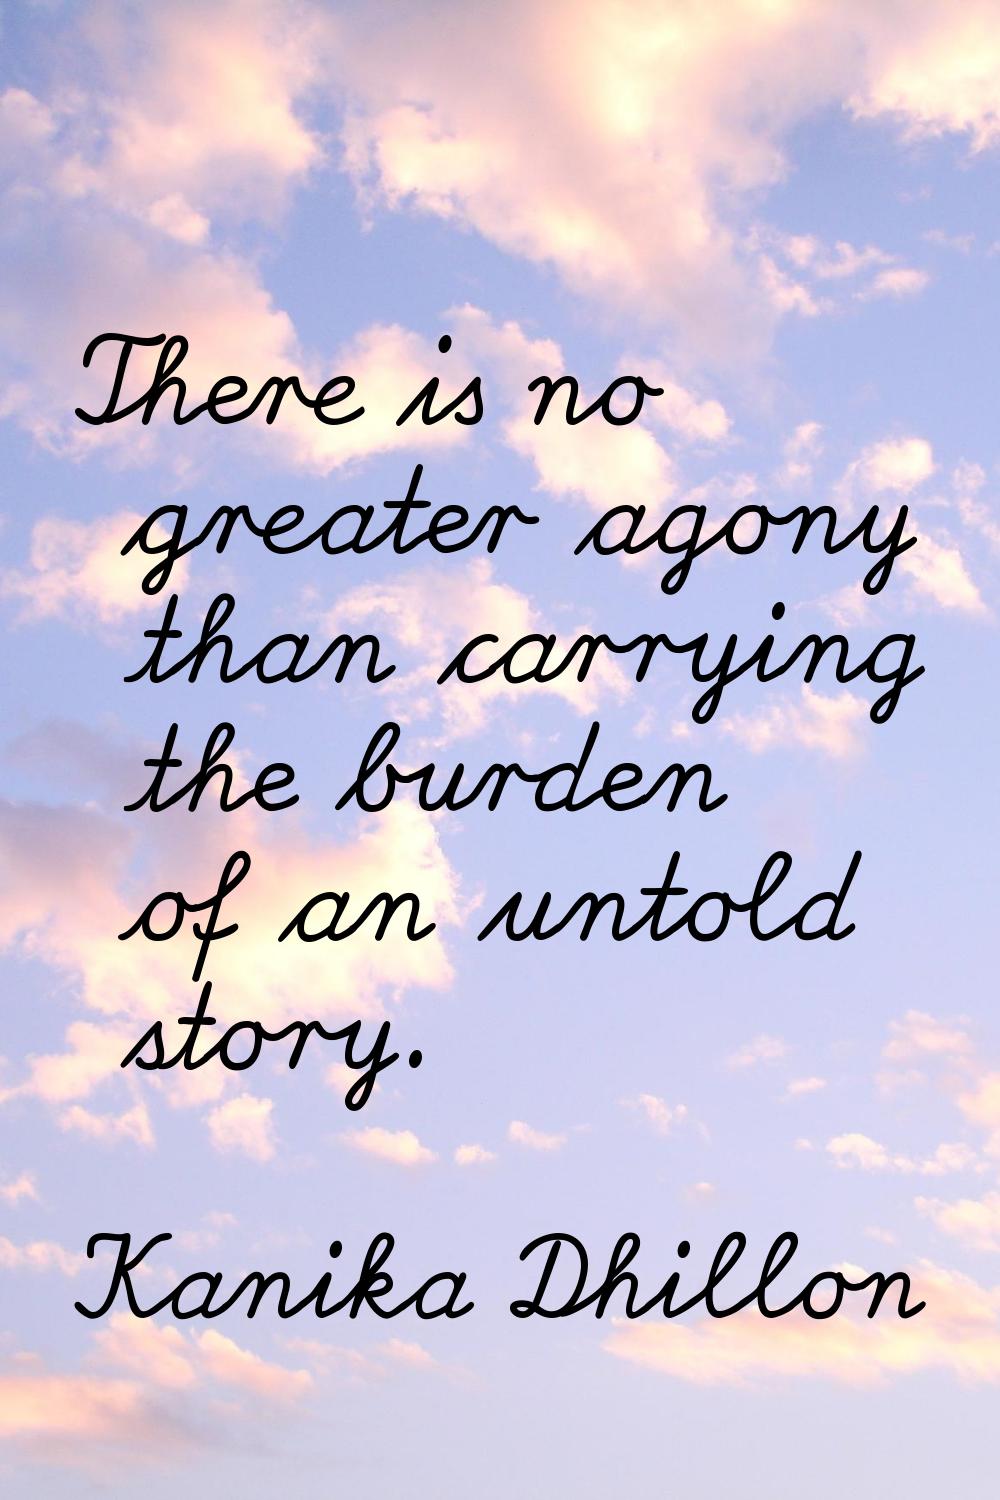 There is no greater agony than carrying the burden of an untold story.